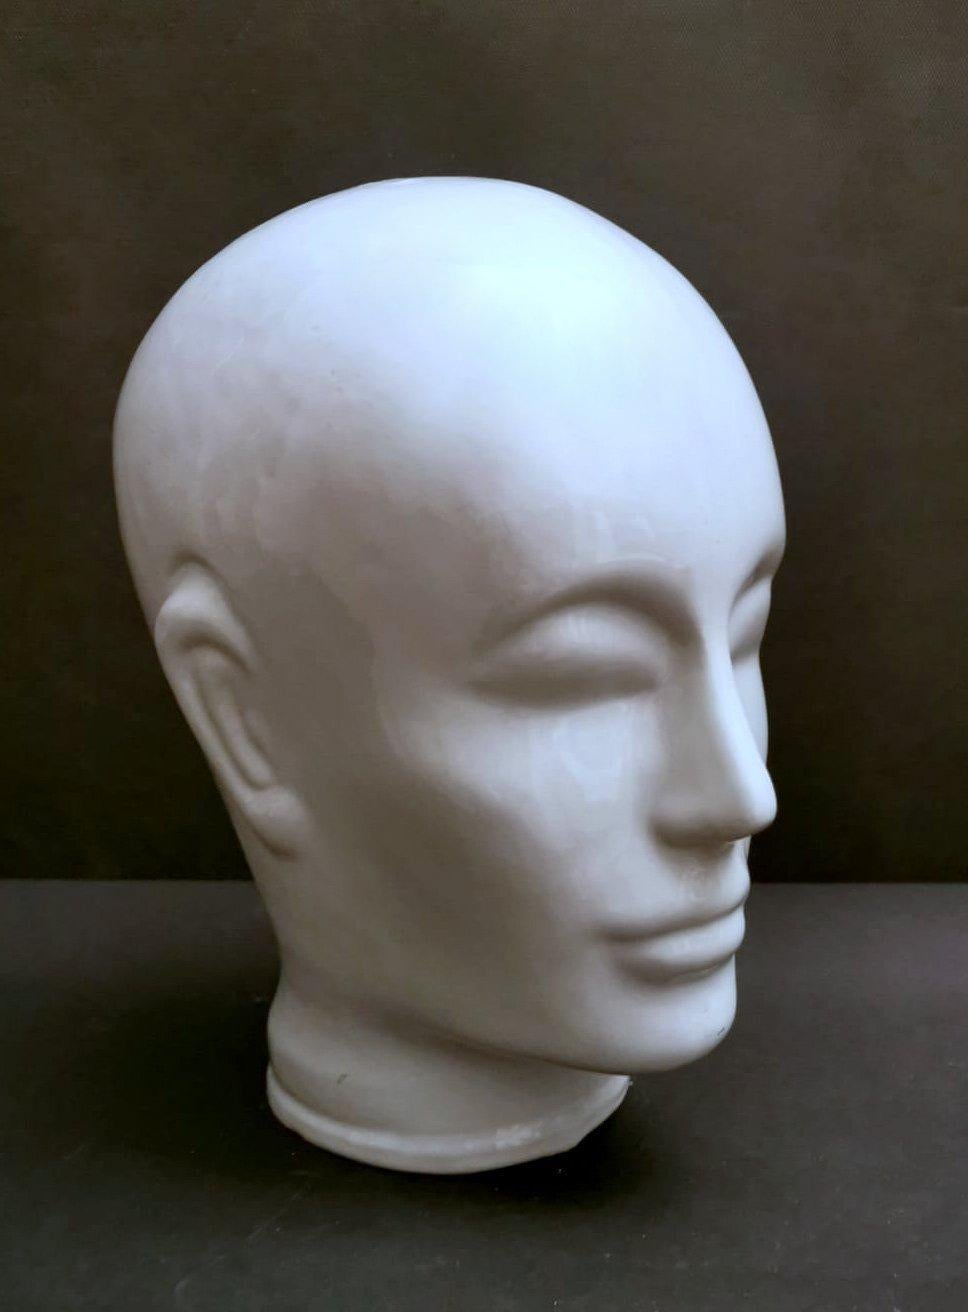 We kindly suggest you read the whole description, because with it we try to give you detailed technical and historical information to guarantee the authenticity of our objects.
Original and particular head in white glazed ceramic, the facial